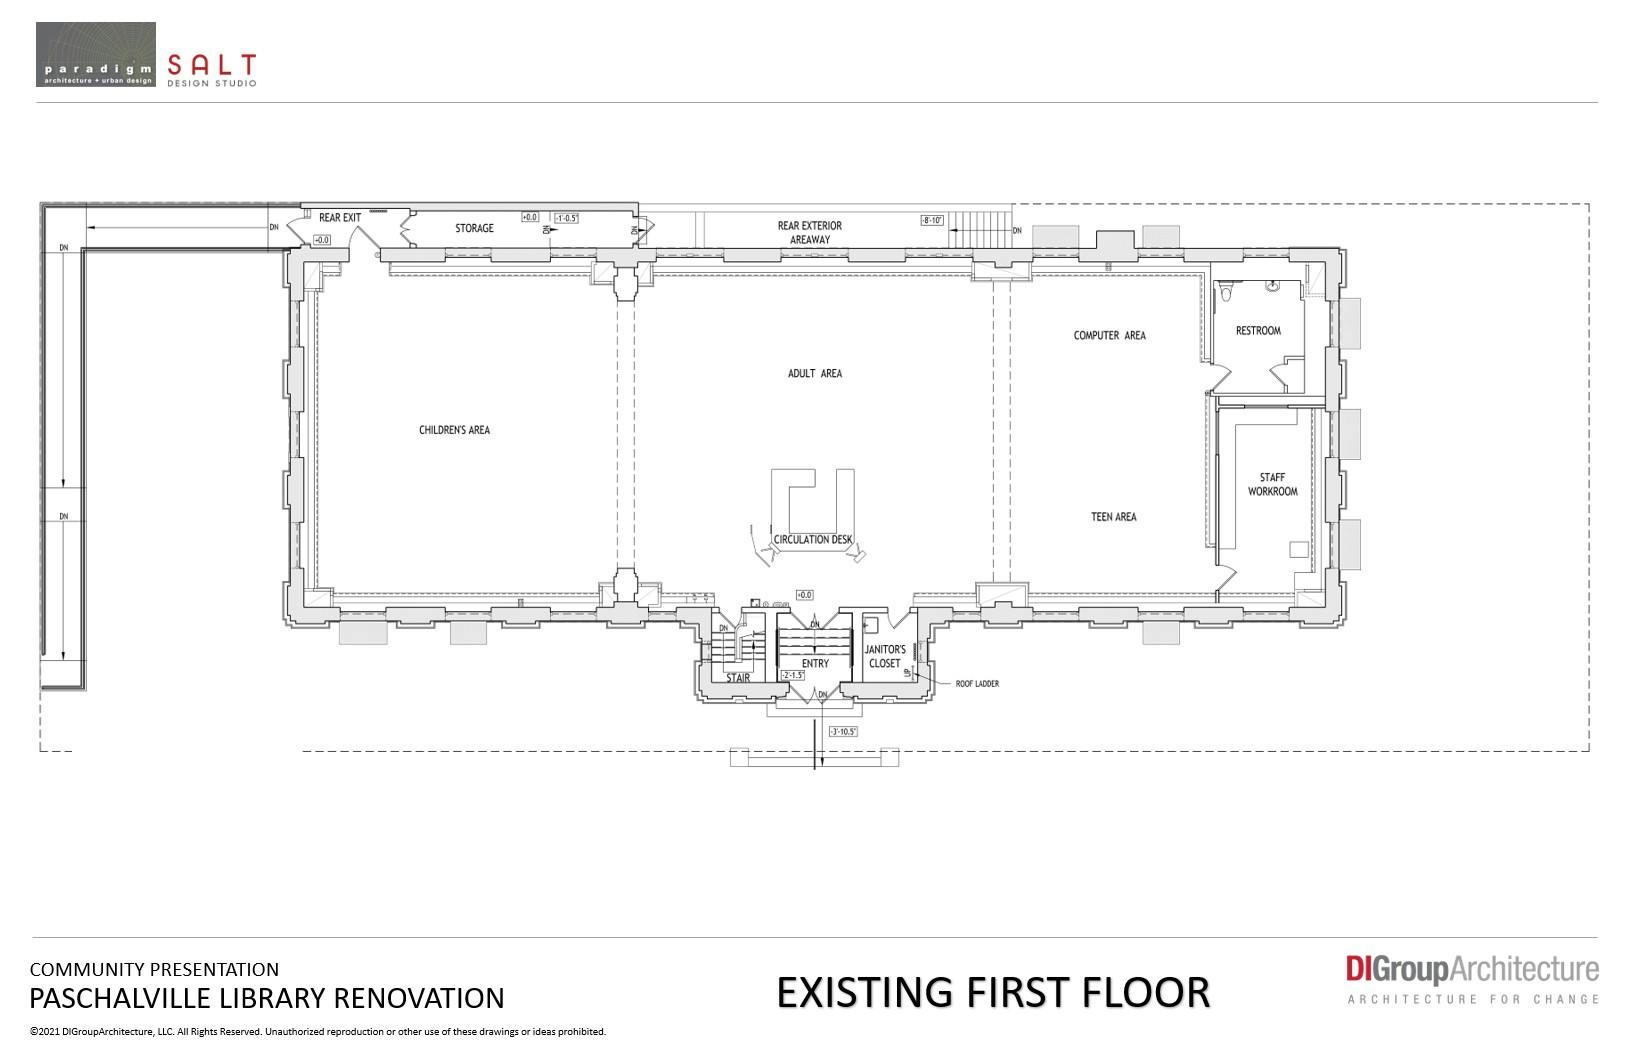 Existing First Floor